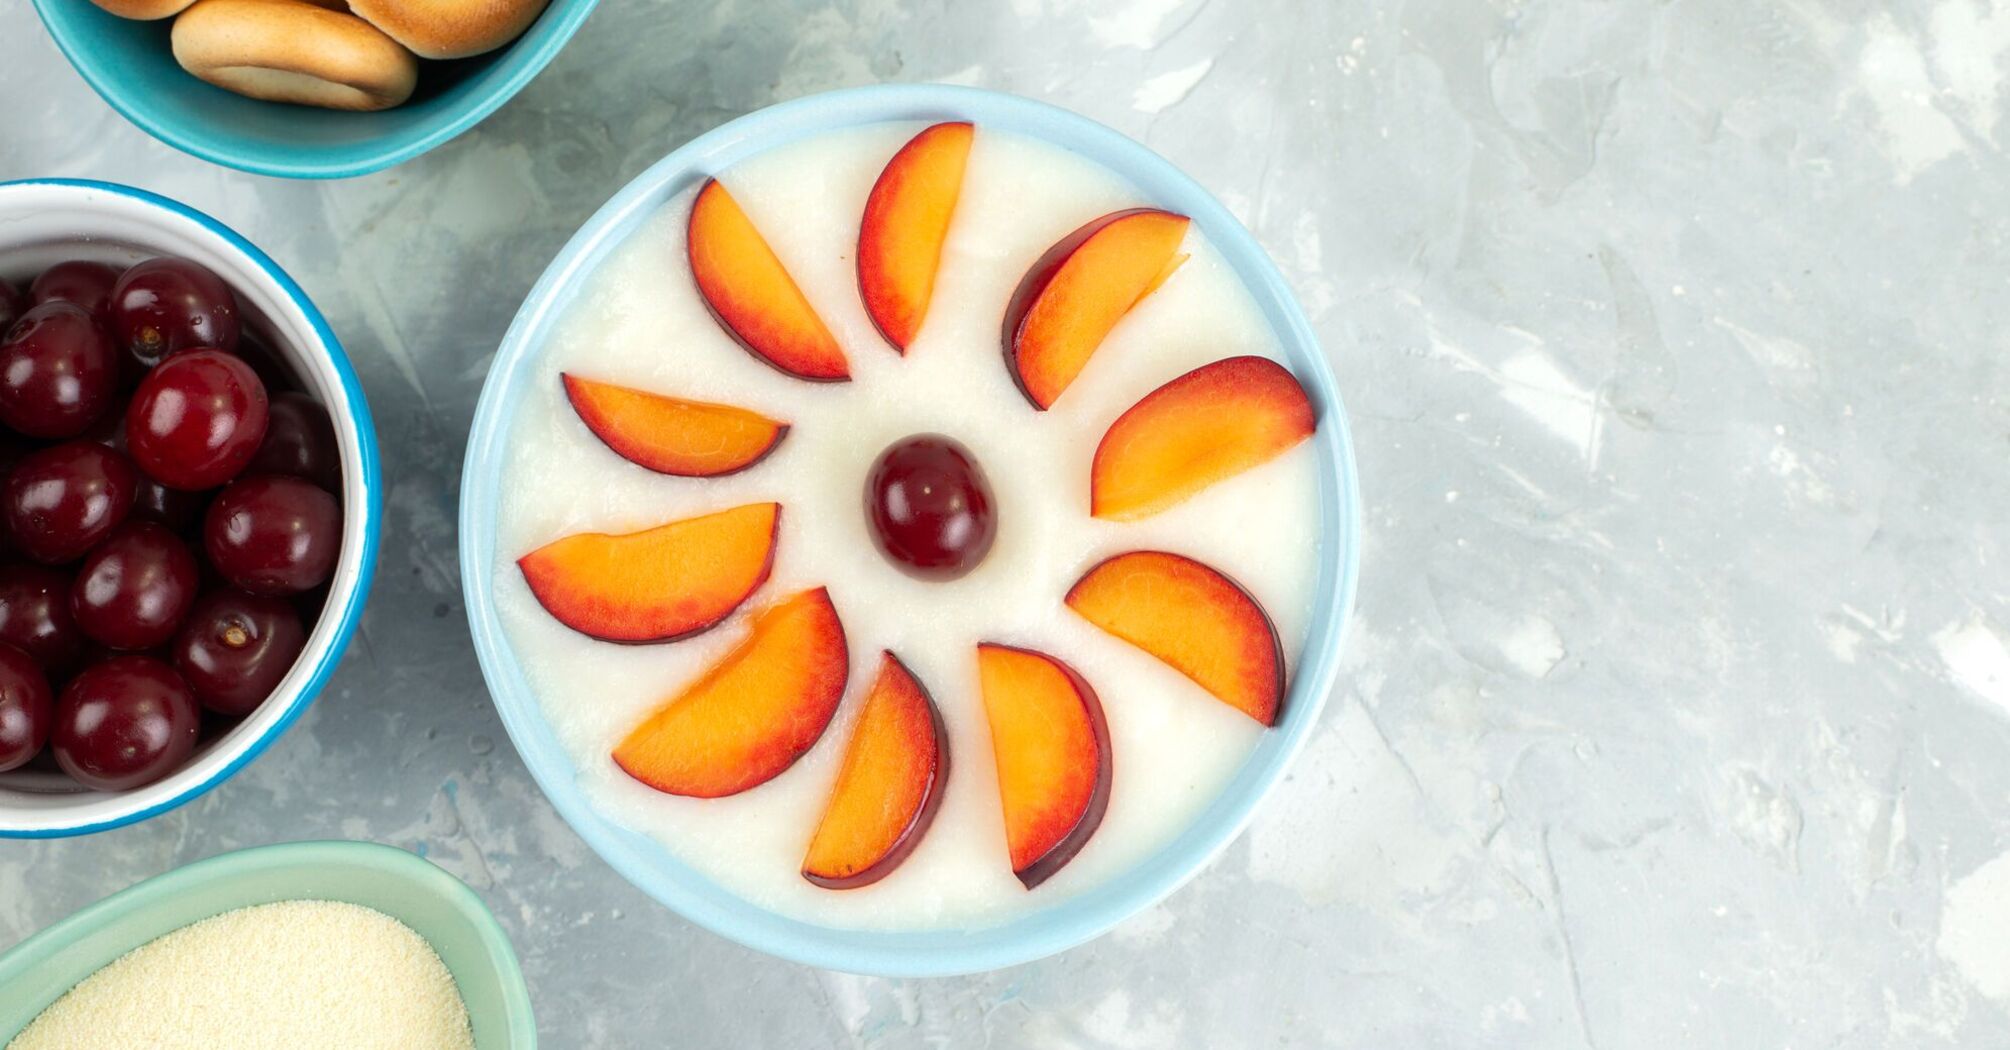 The perfect summer peach dessert you can make even without power